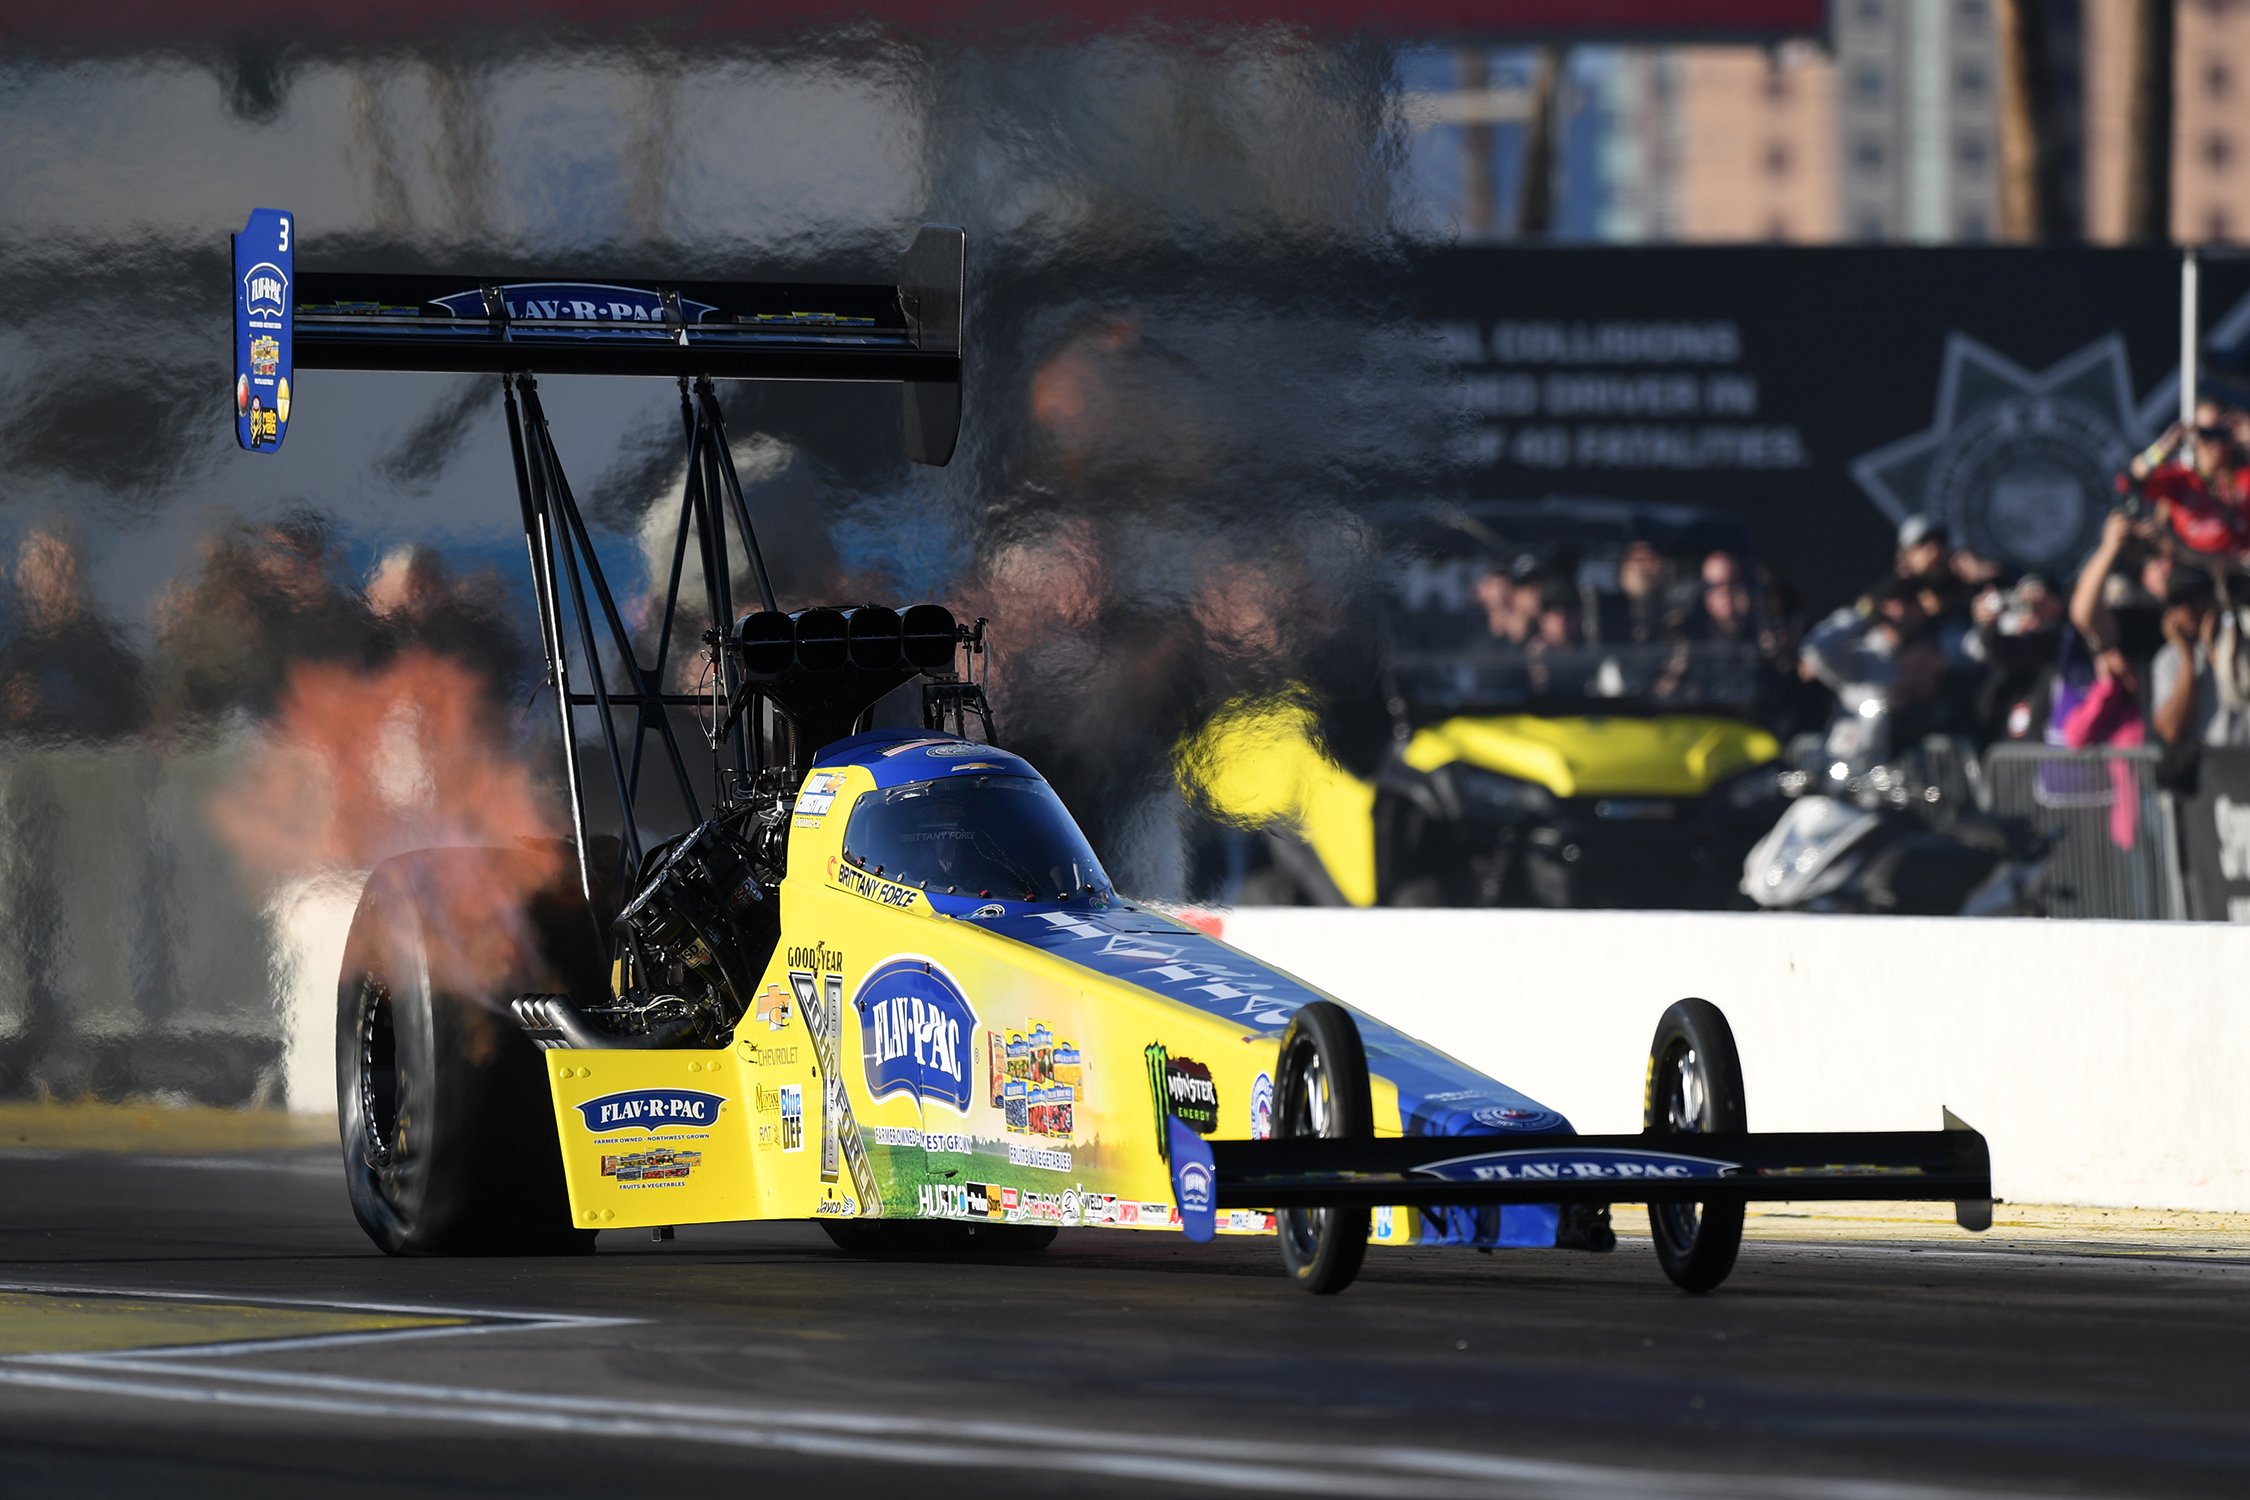 NHRA Announces Revised Schedule, Will Resume At Indy July 1112